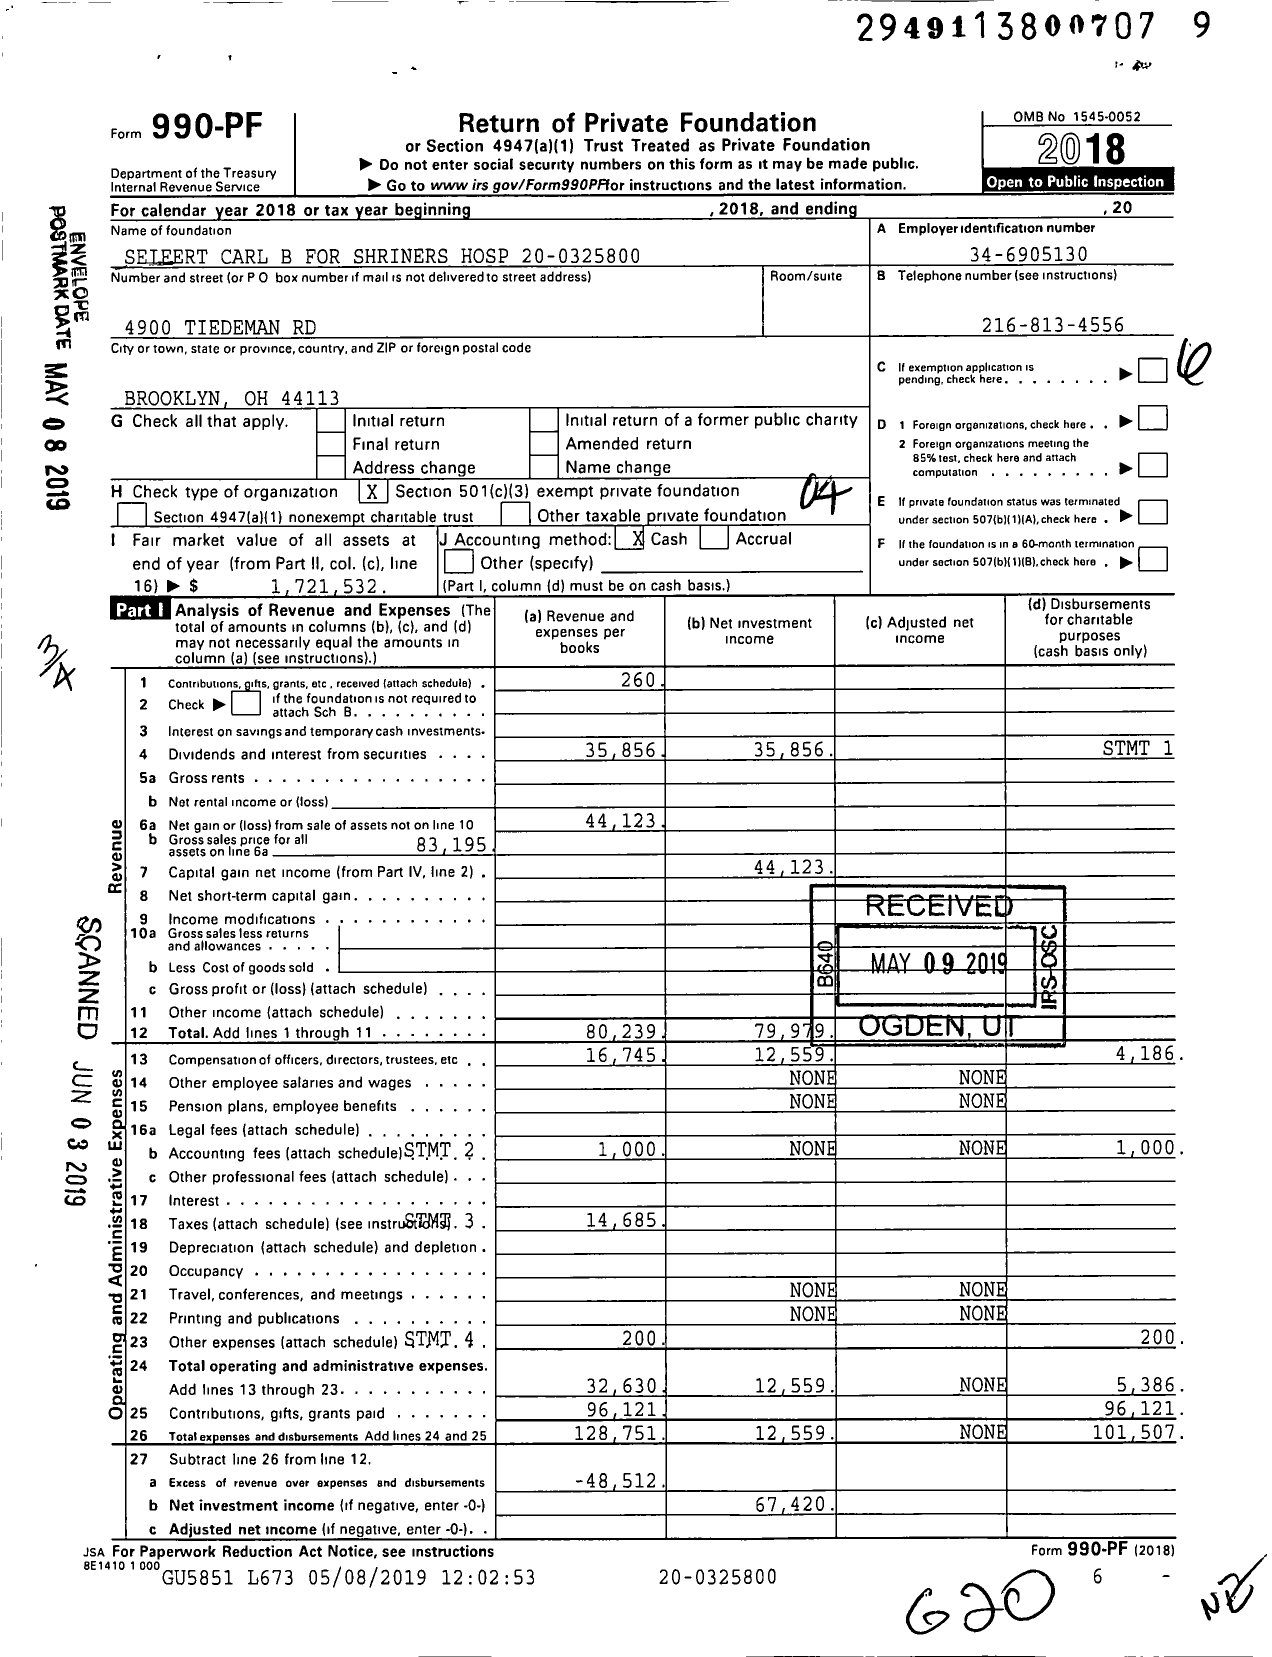 Image of first page of 2018 Form 990PF for Seifert Carl B for Shriners Hospital